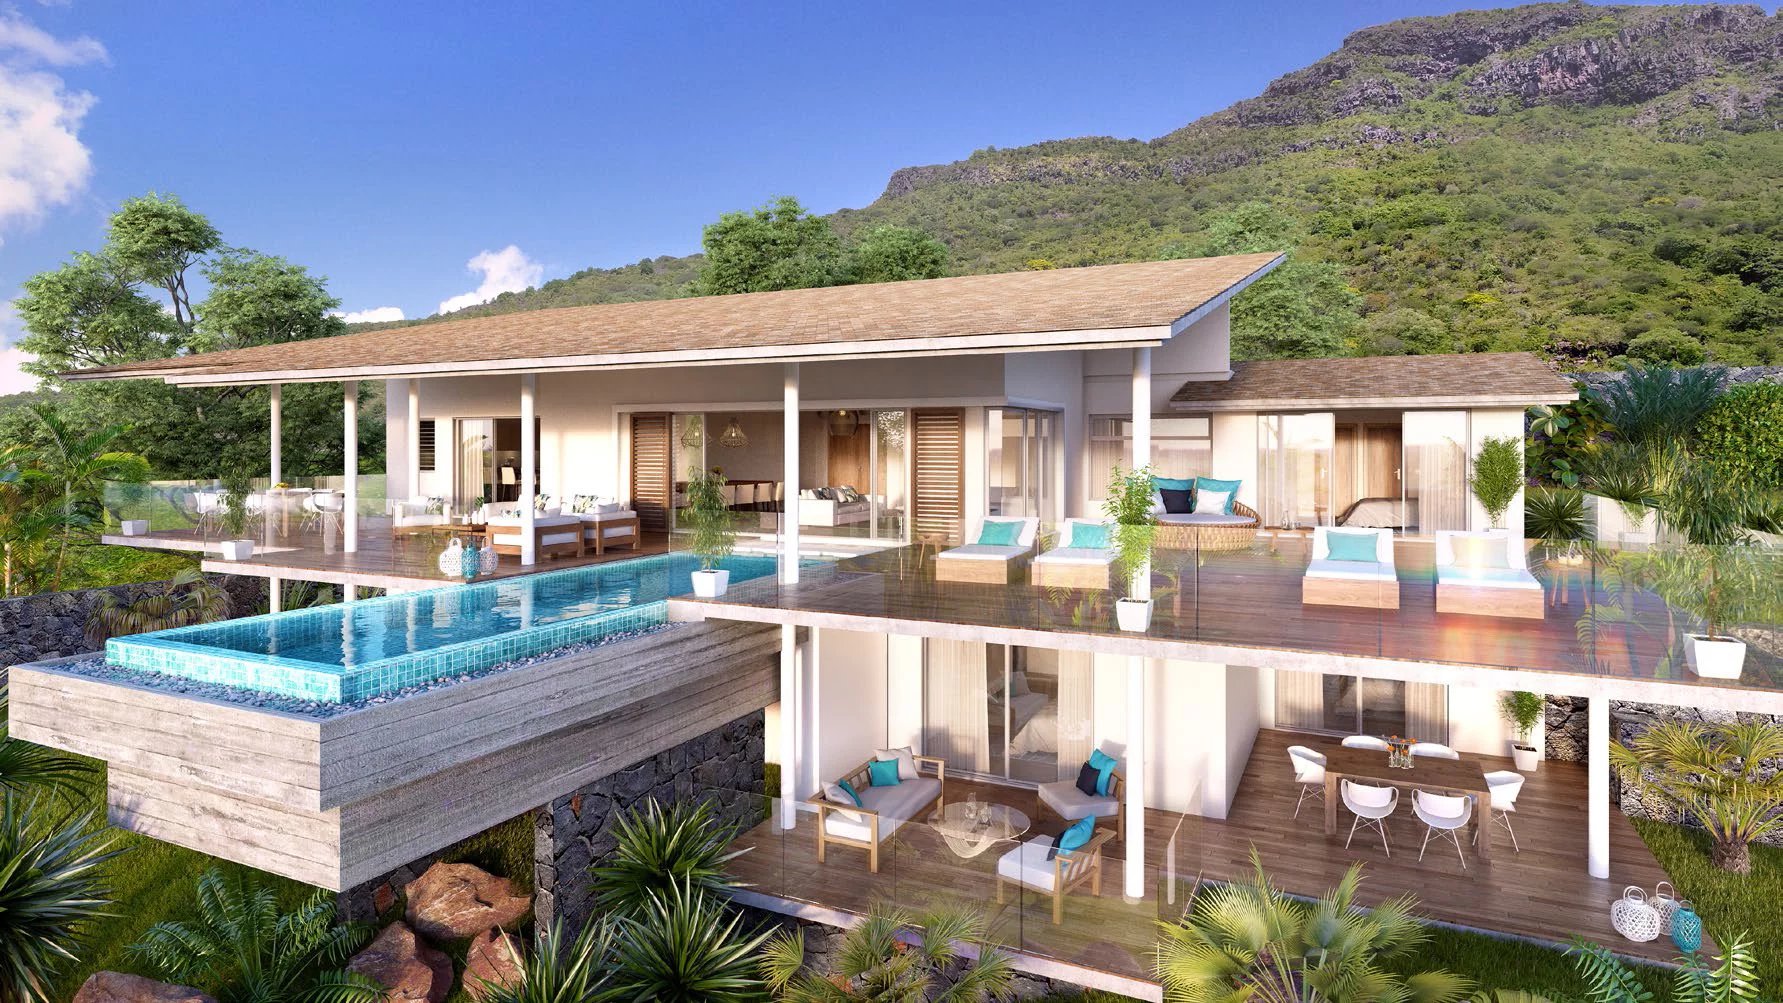 BLACK RIVER - Off-plan - Villa with view on the Morne - 4 bedrooms